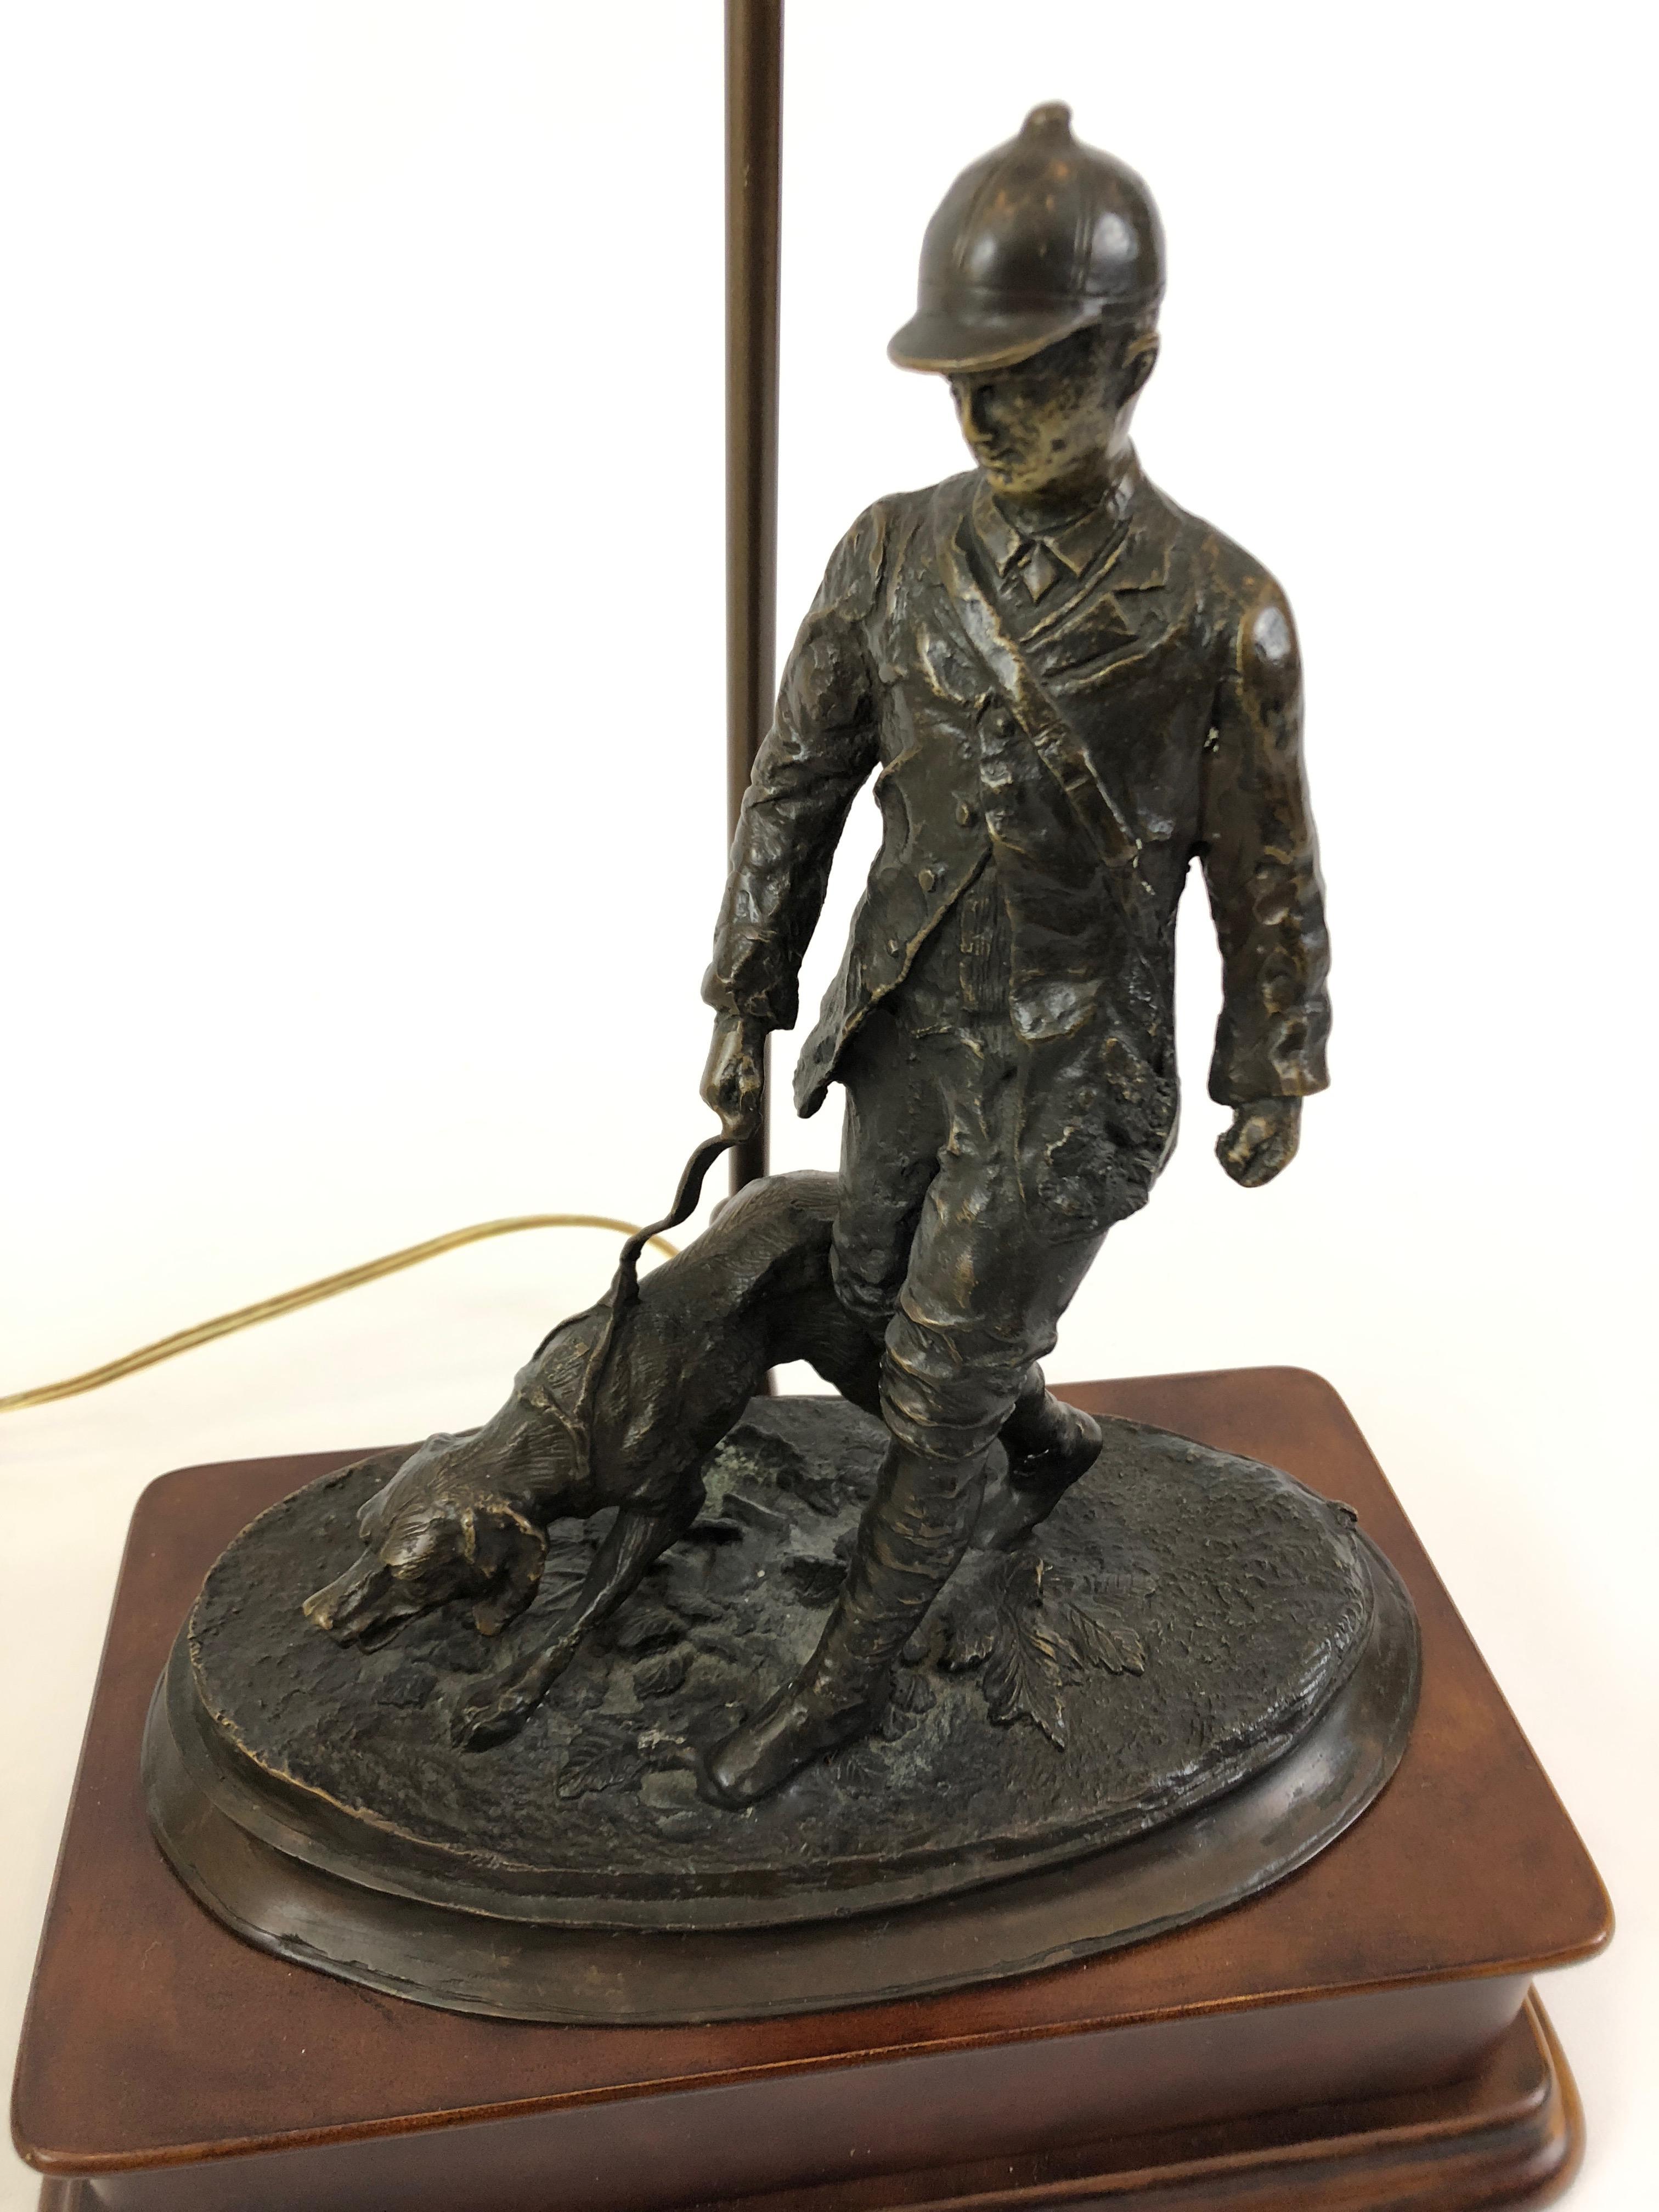 Artful table lamp having bronze sculpture of a hunter and his dog on wooden base with beautiful silk shade and decorative finial.
Sculpture is 15.5 H
Base is 12.25 x 6.75.